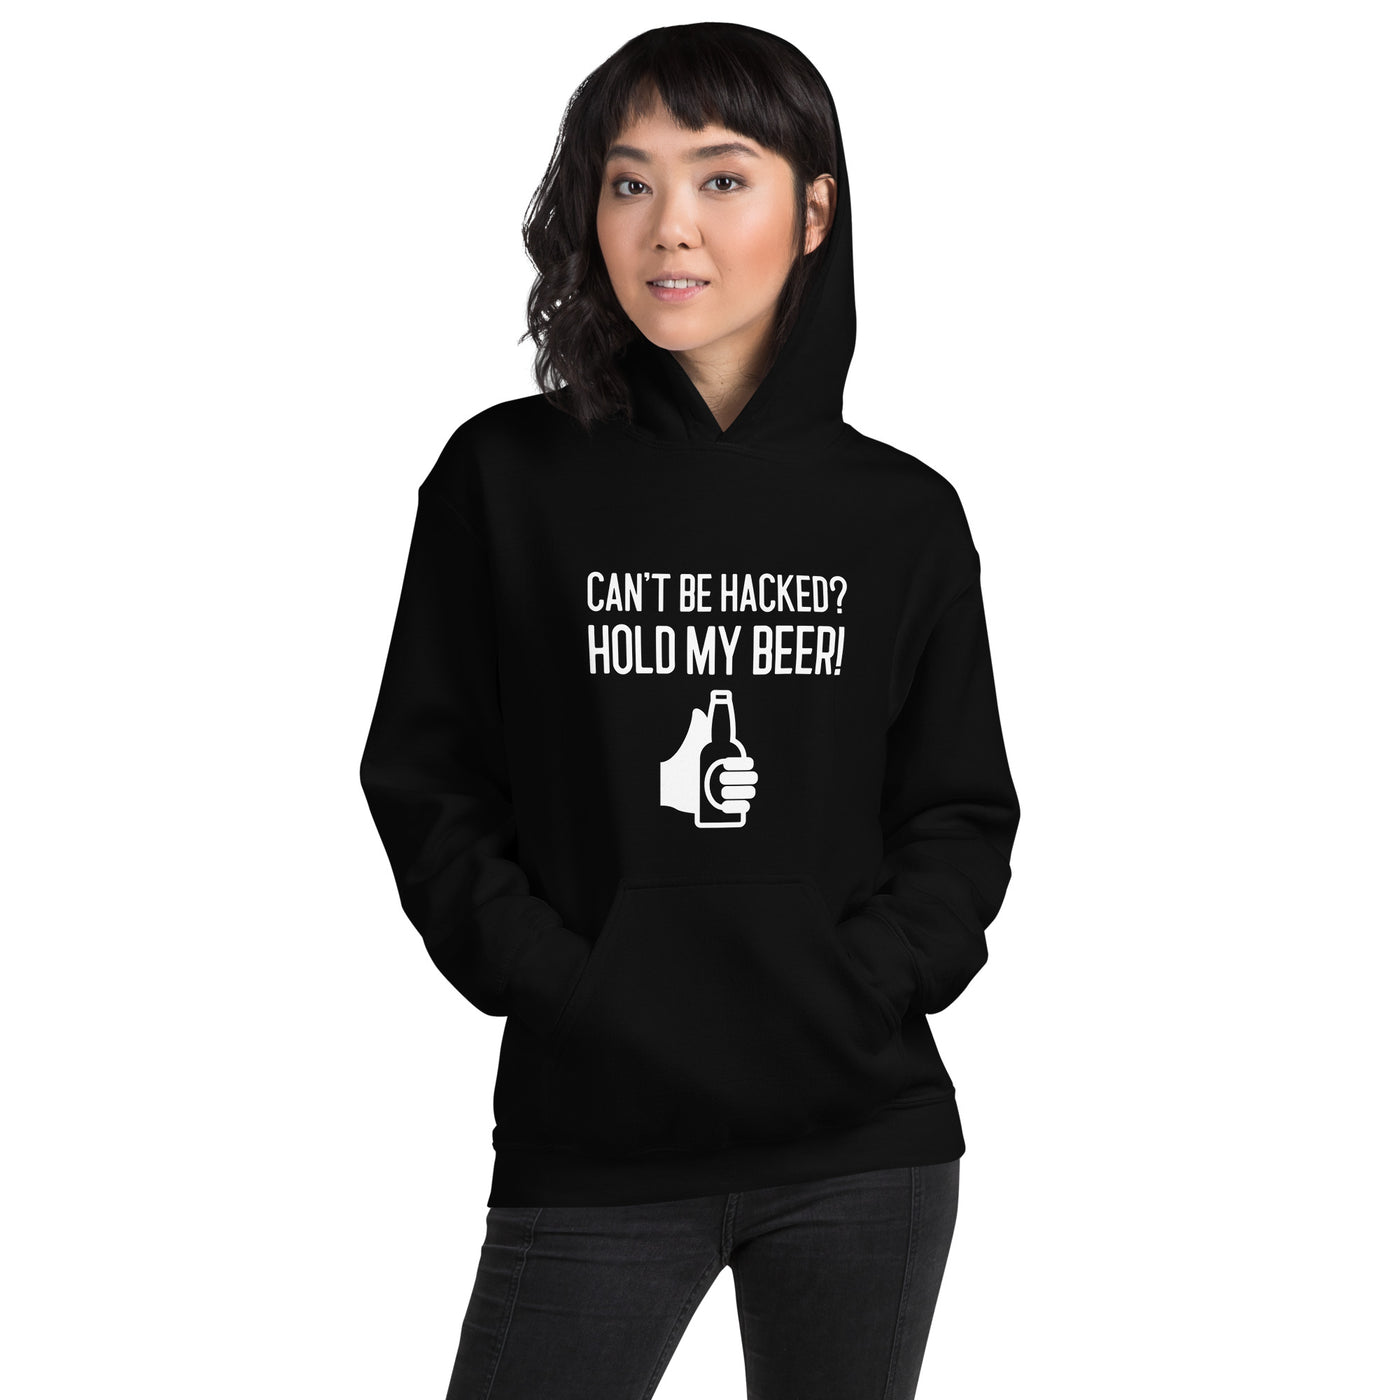 Can’t be hacked? Hold my beer! - Unisex Hoodie